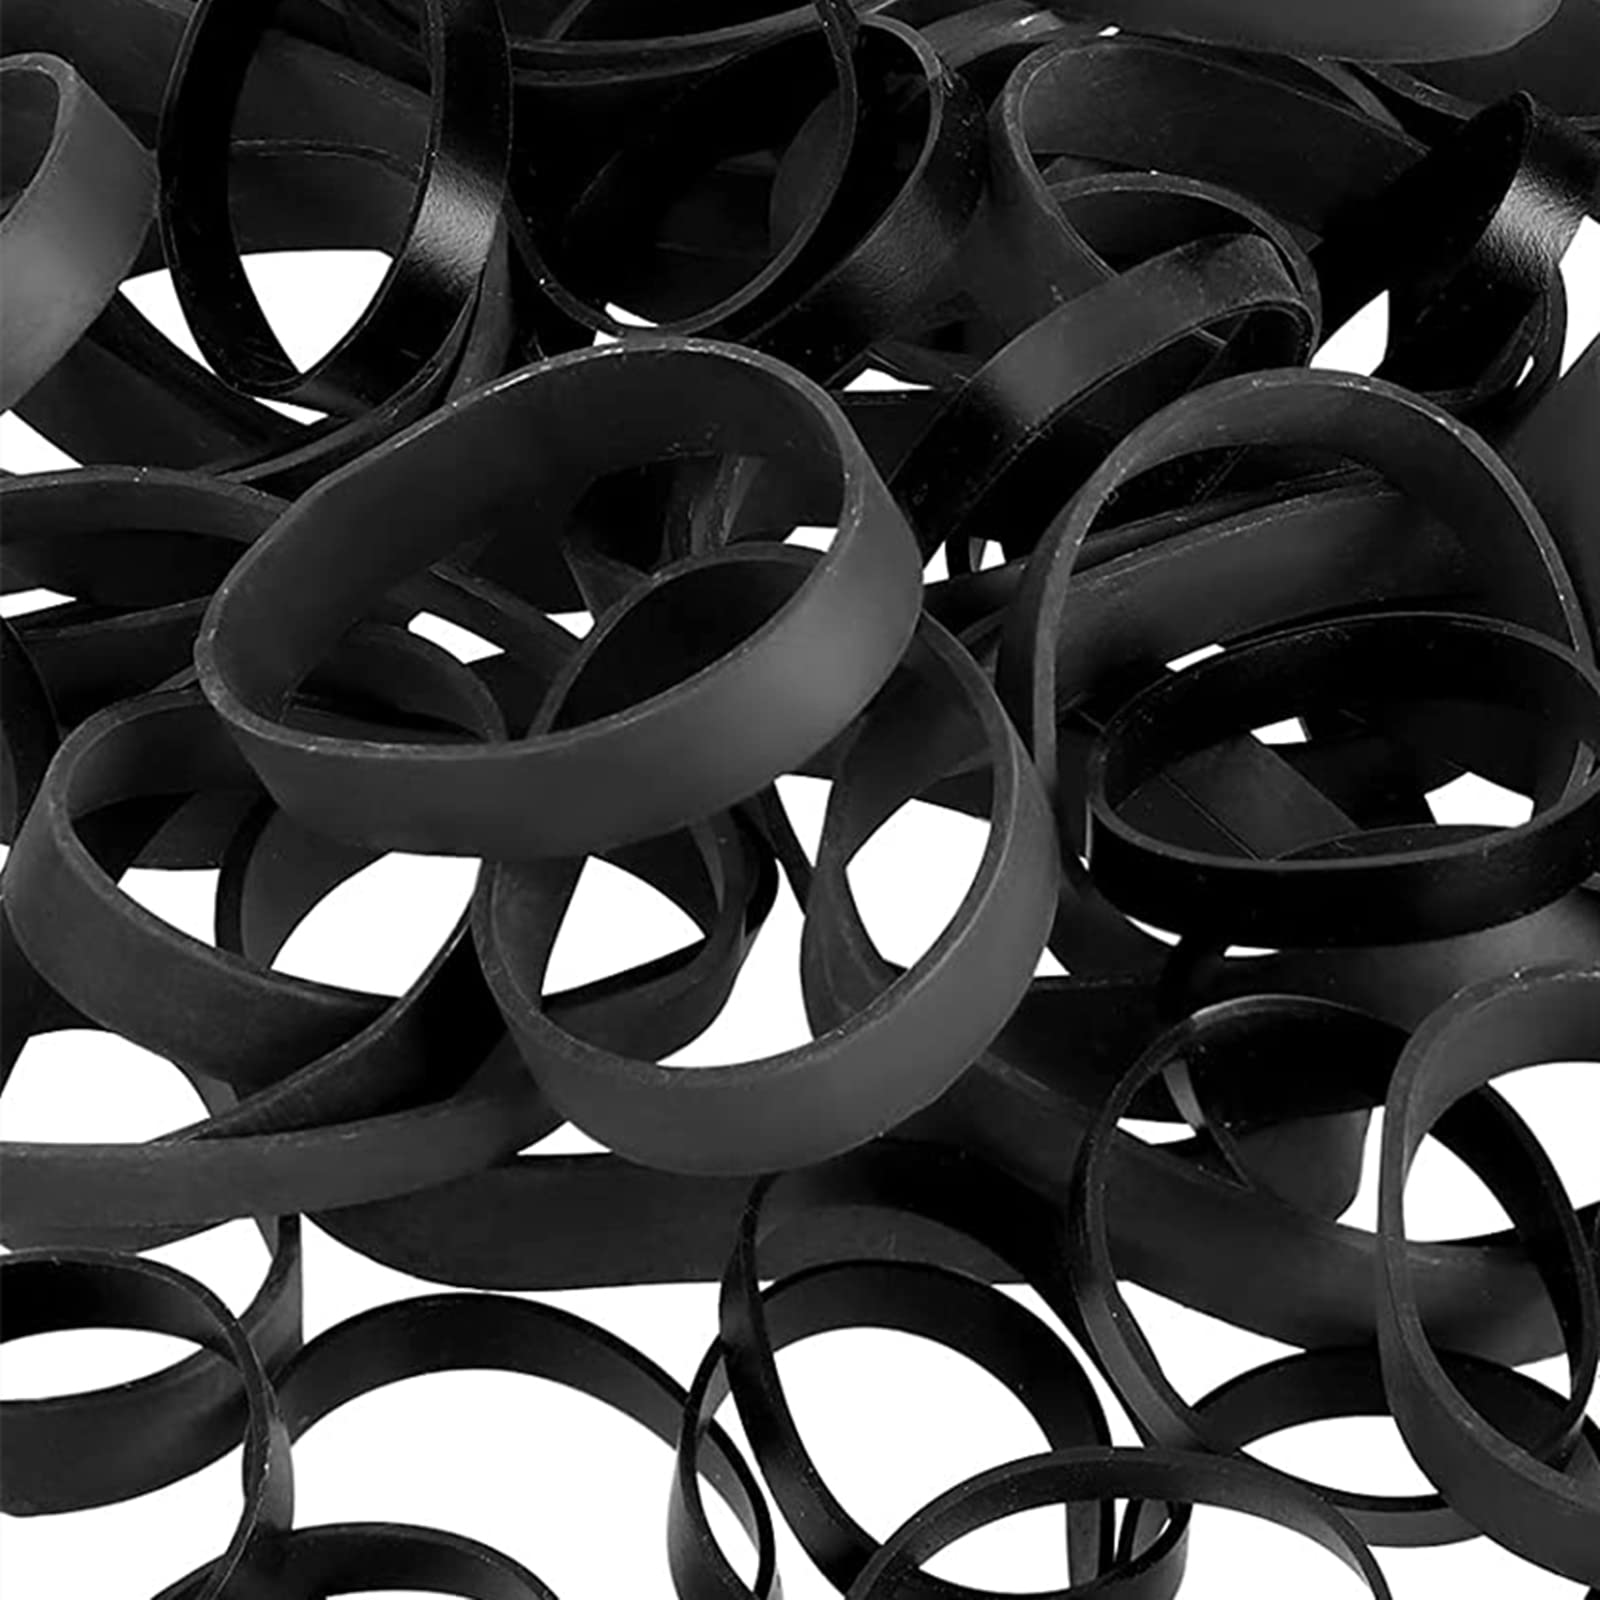 Tactical Rubber Bands Black - 100 Pieces 2 Size Heavy Duty UV Heat Cold  Resistant Thick Strong